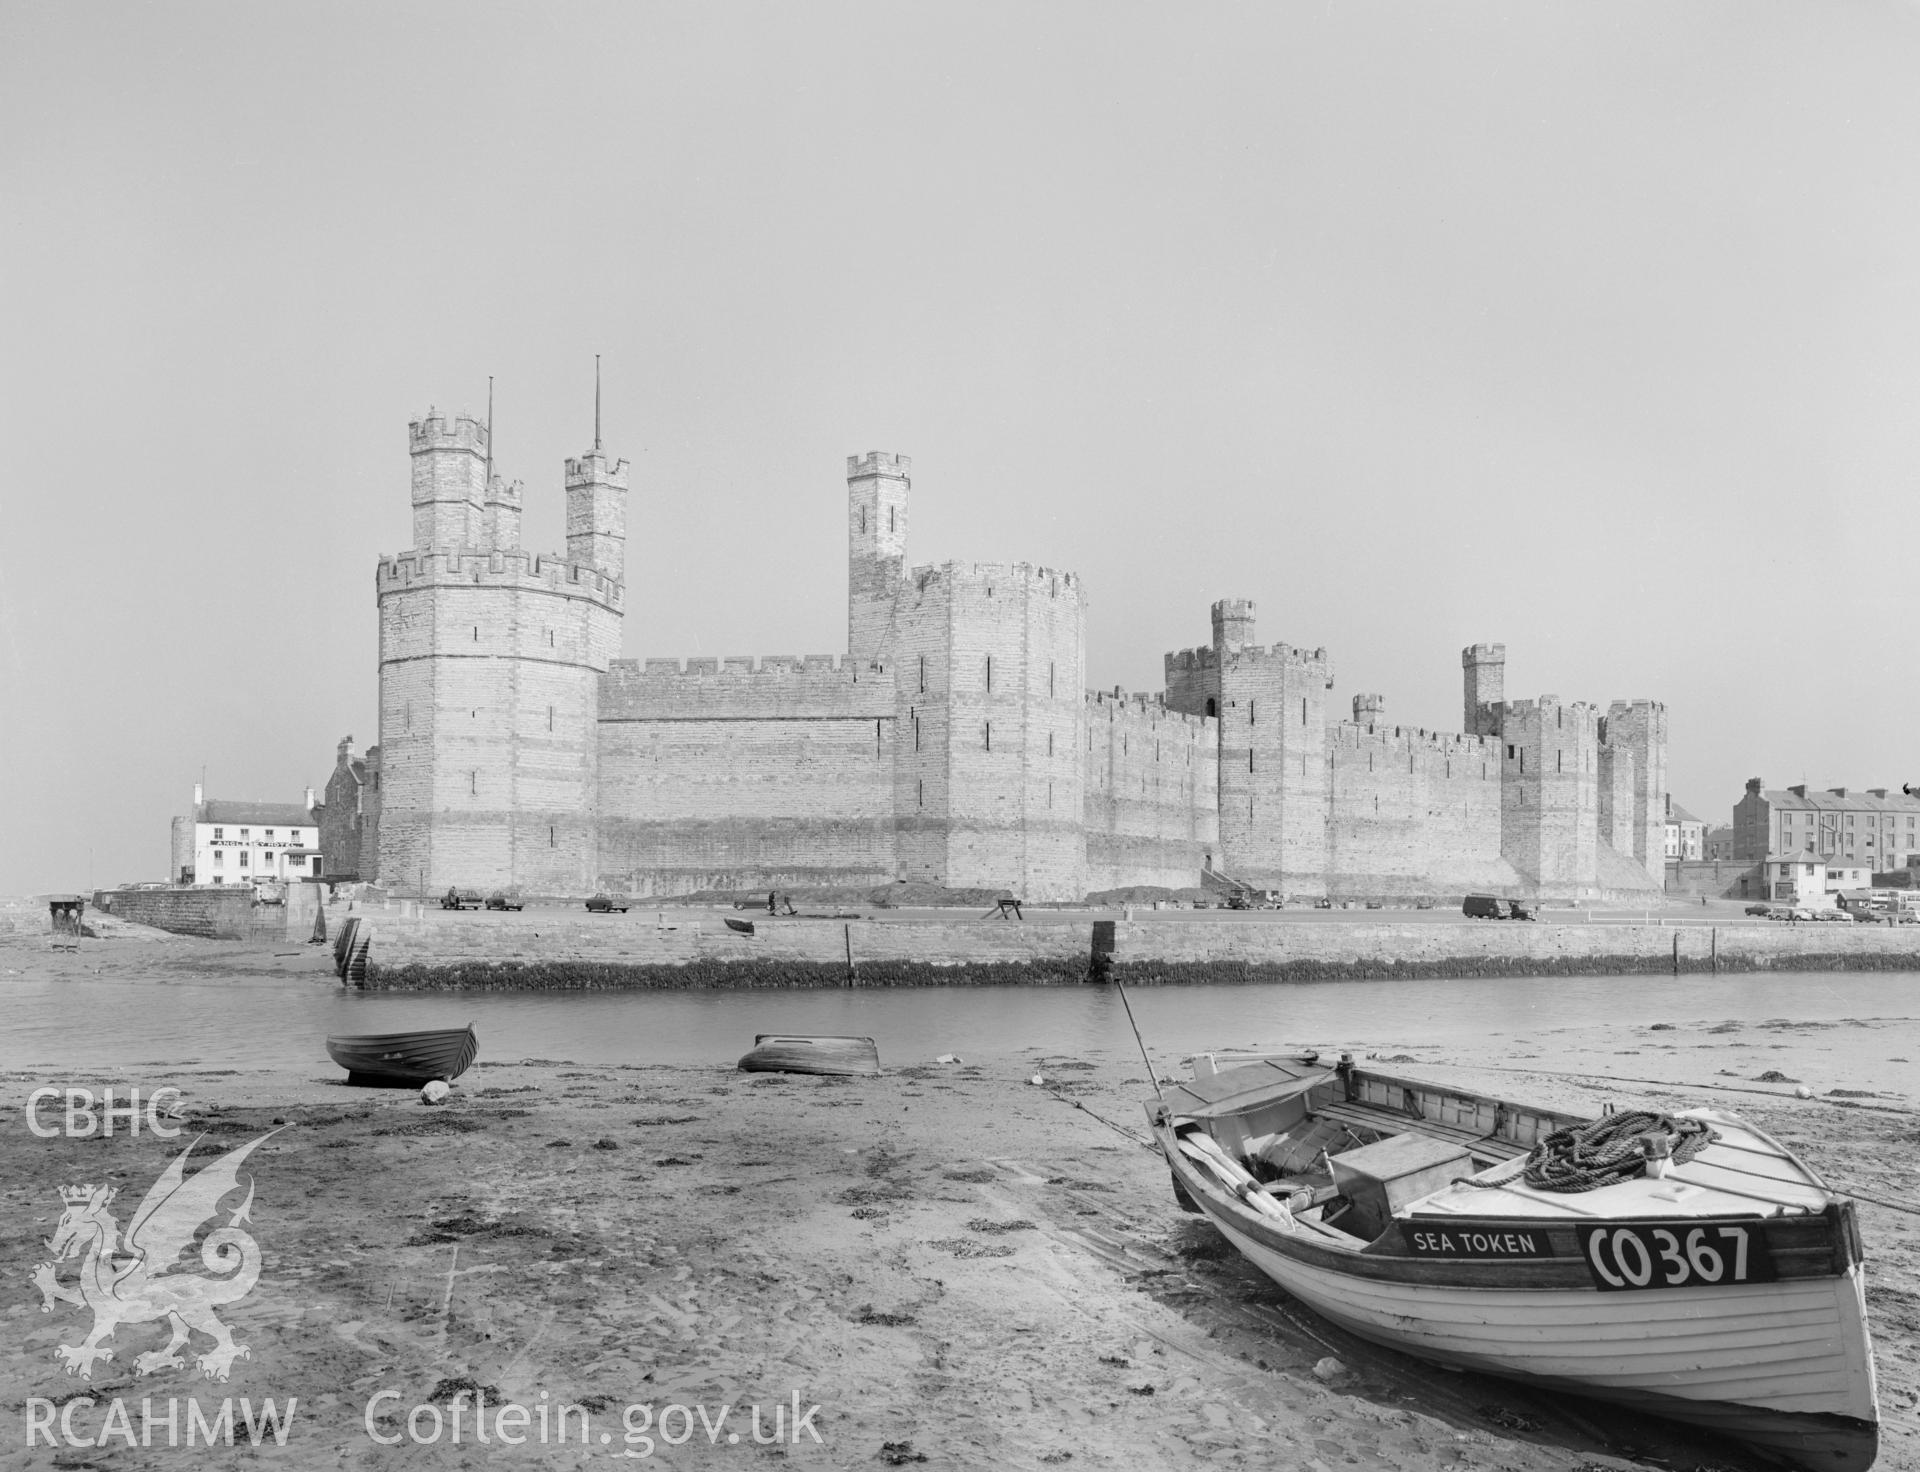 Digital copy of a black and white negative showing a view of Caernarfon Castle, from the Central Office of Information.